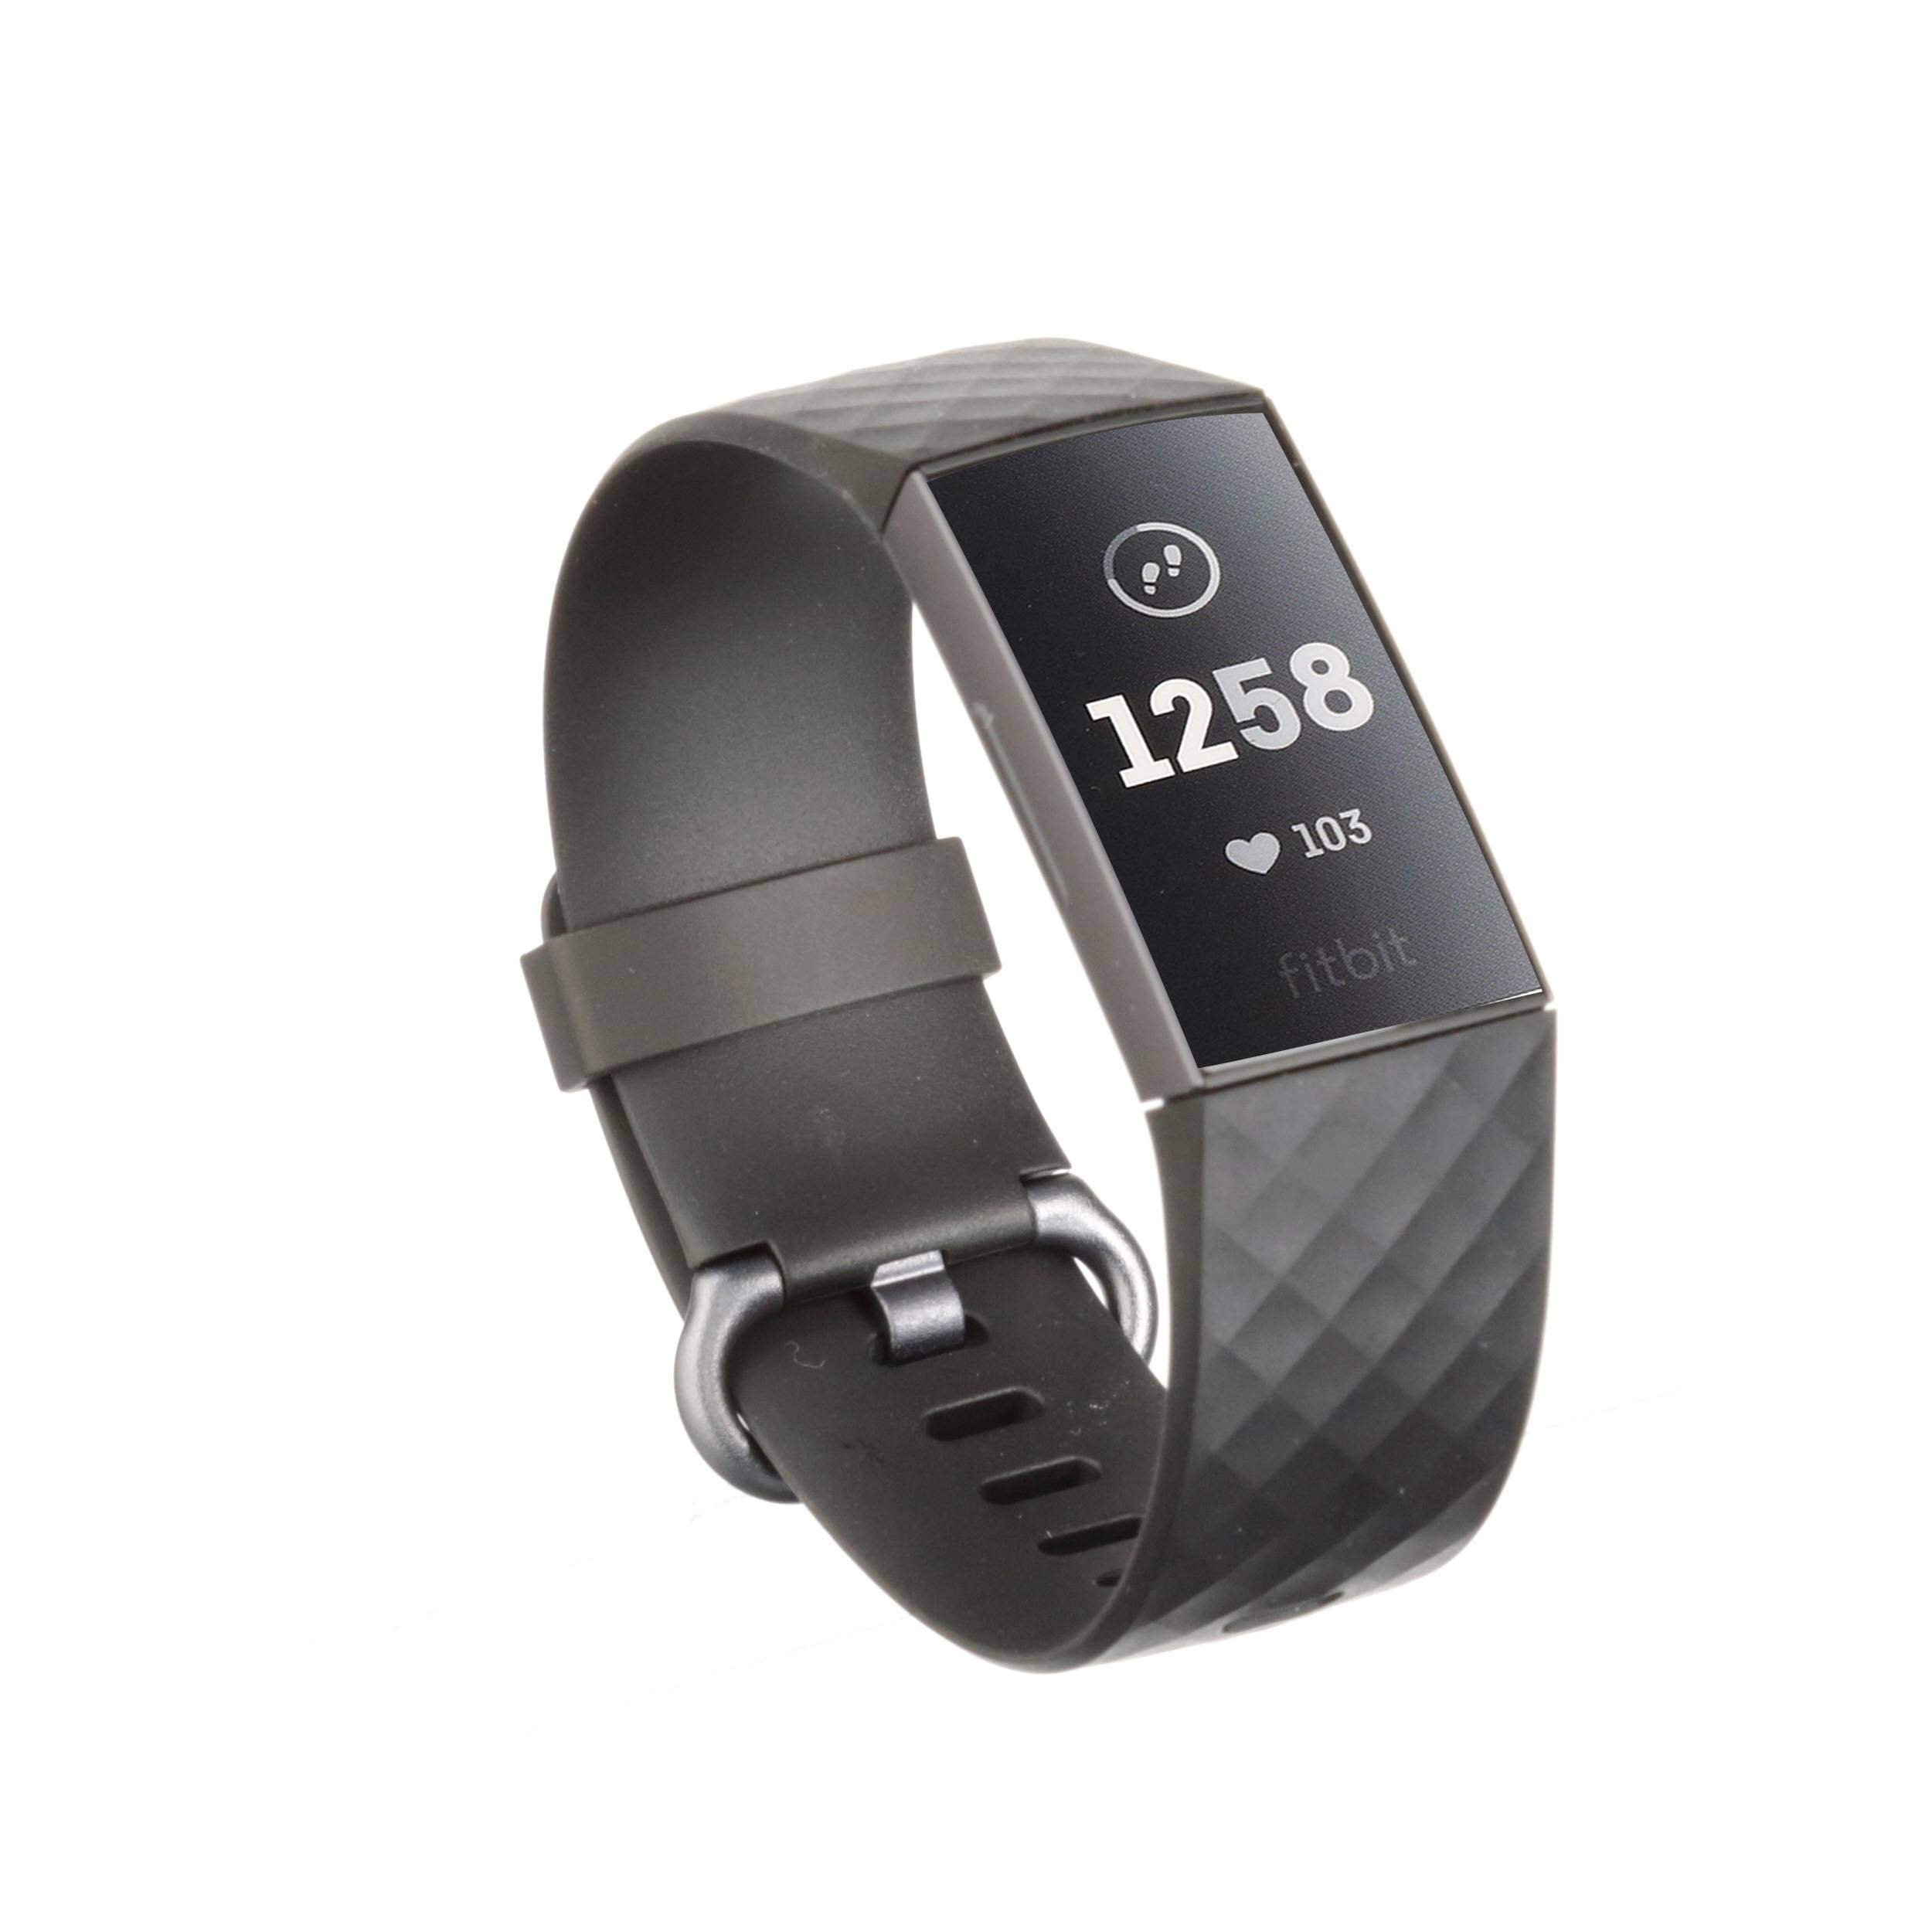 Fitbit Charge 3, Fitness Activity Tracker